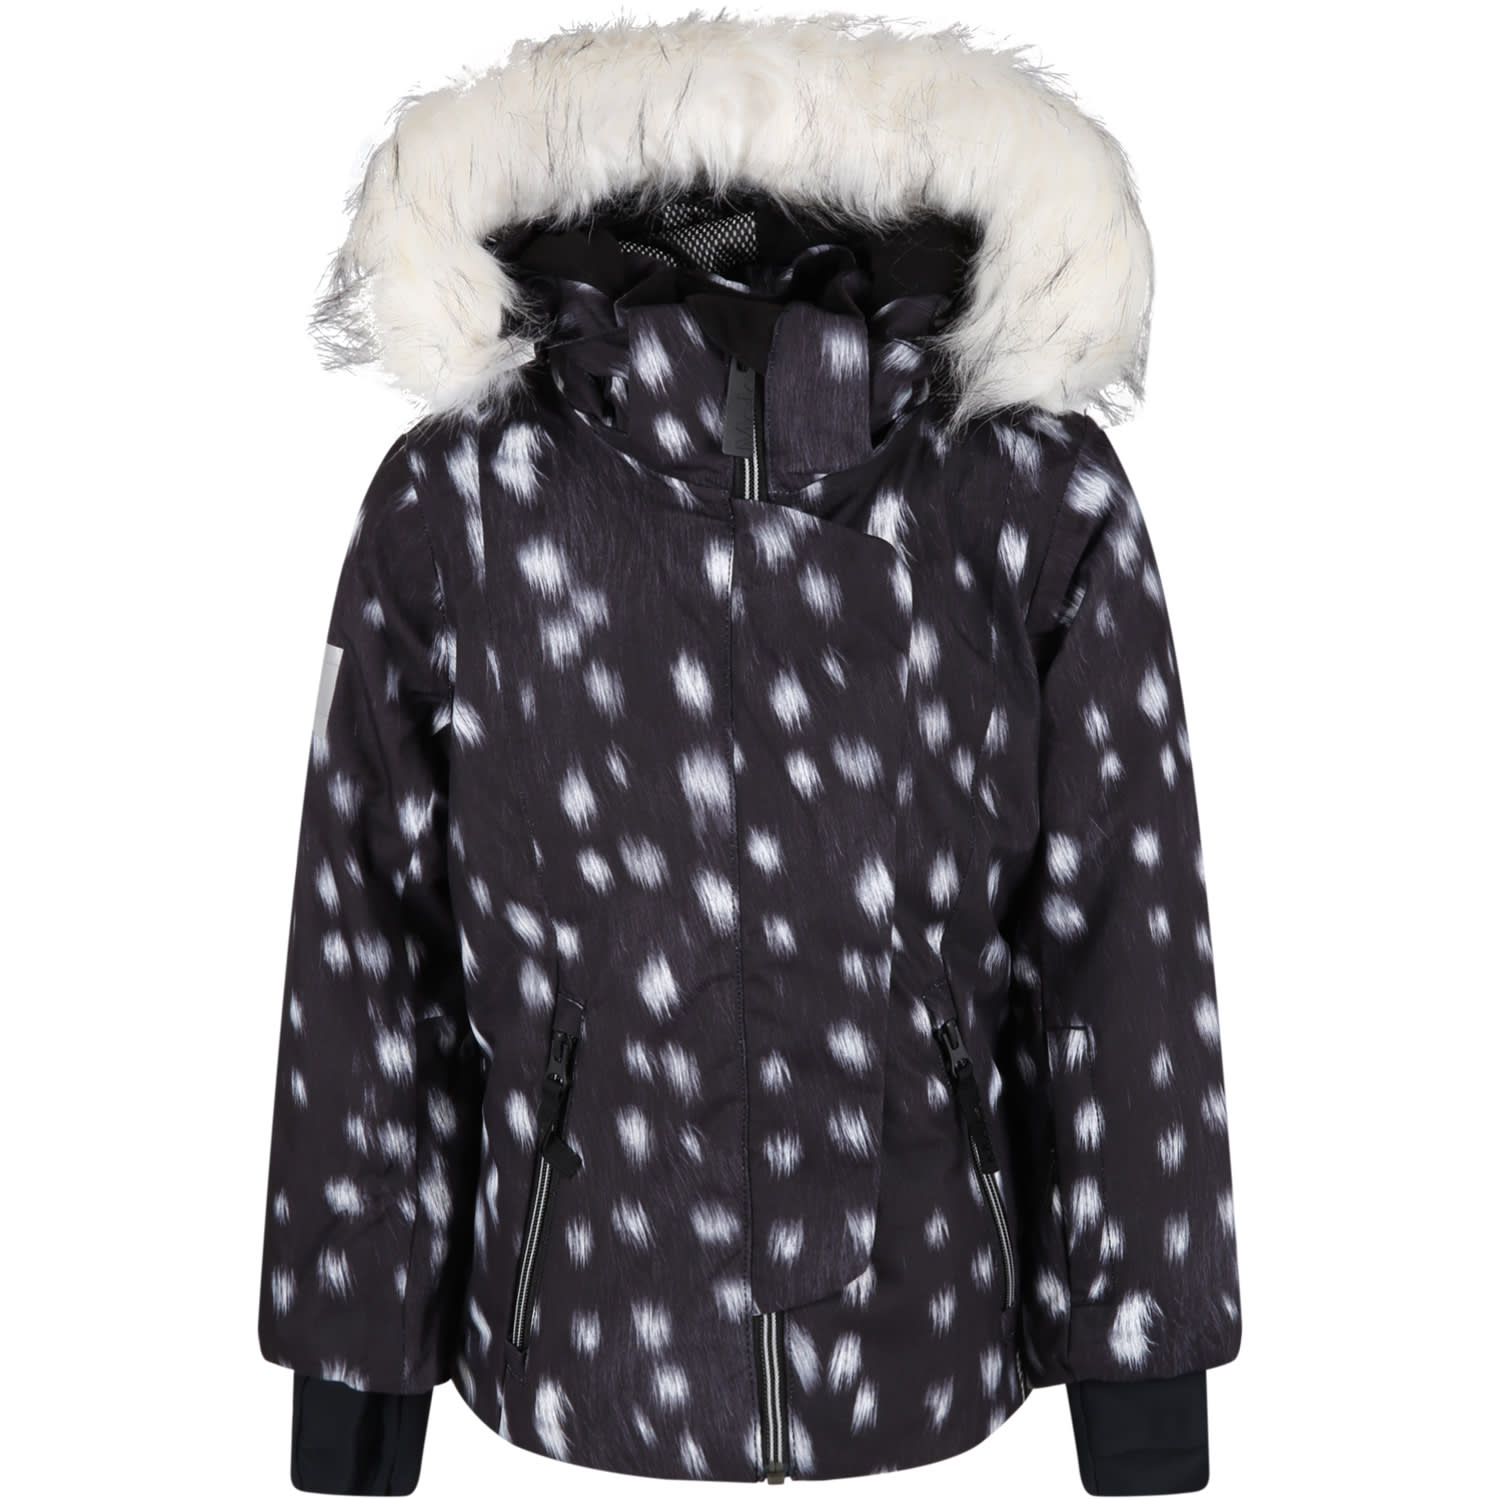 Molo Black Jacket For Kids With White Details